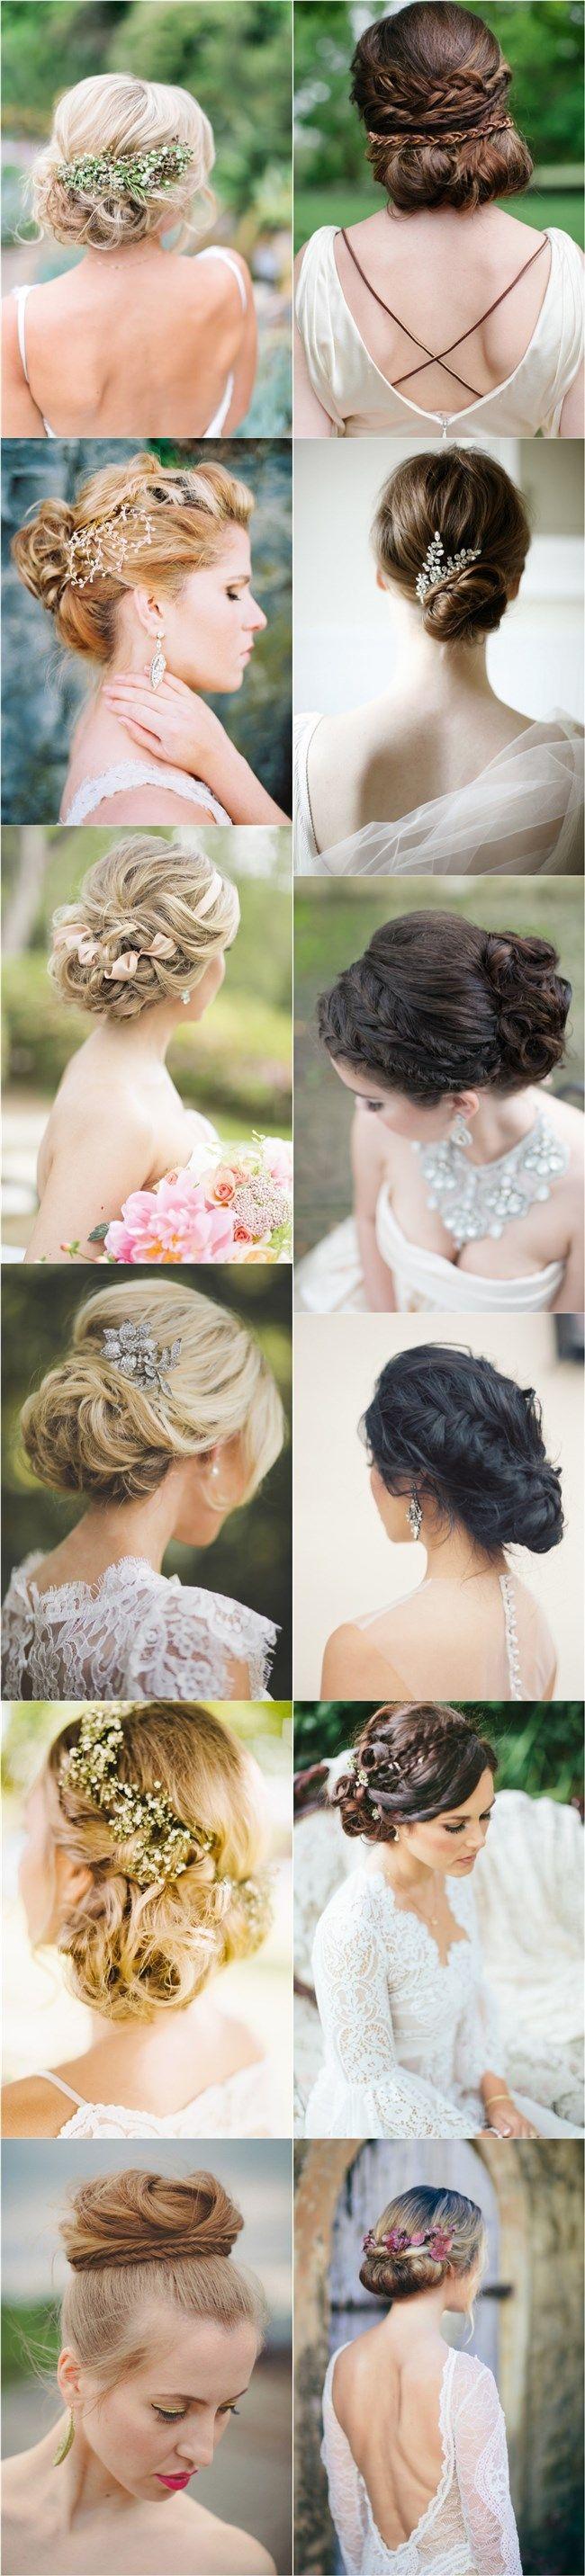 30-fabulous-most-pinned-updos-for-wedding-with-tutorial.jpg